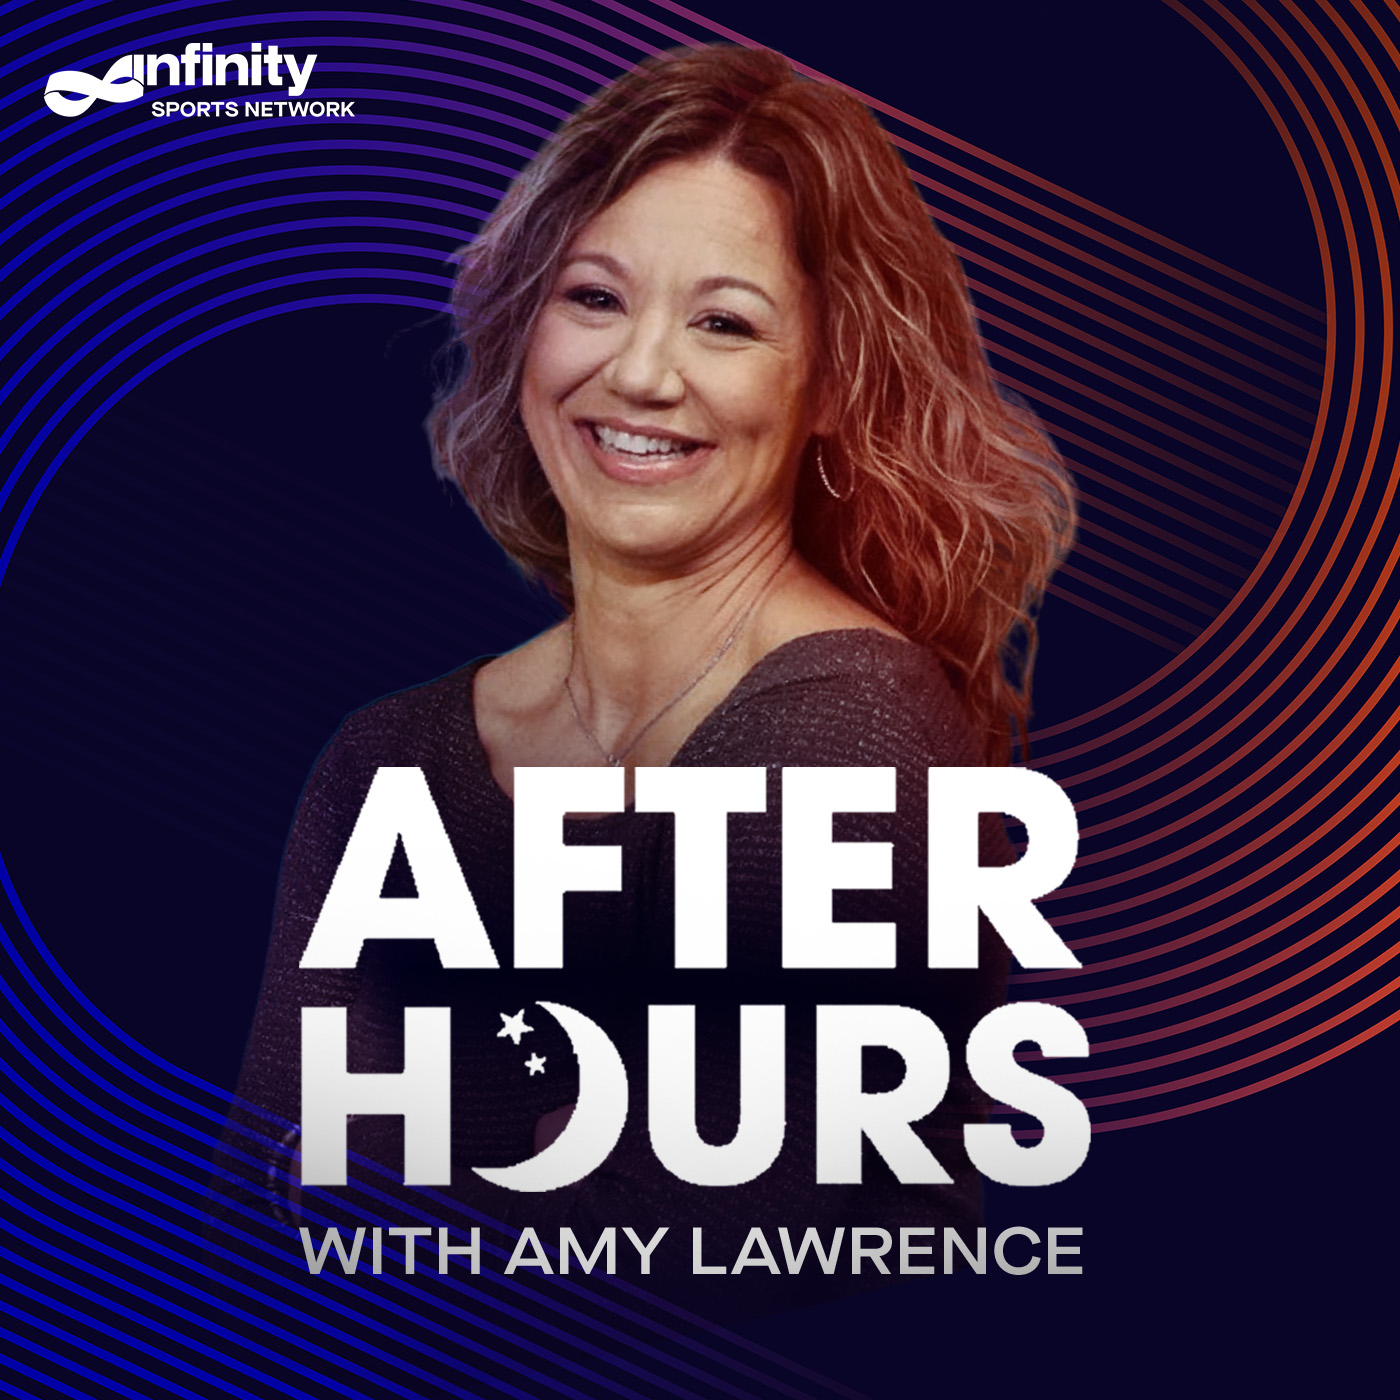 4-4-22 After Hours with Amy Lawrence PODCAST: Hour 1